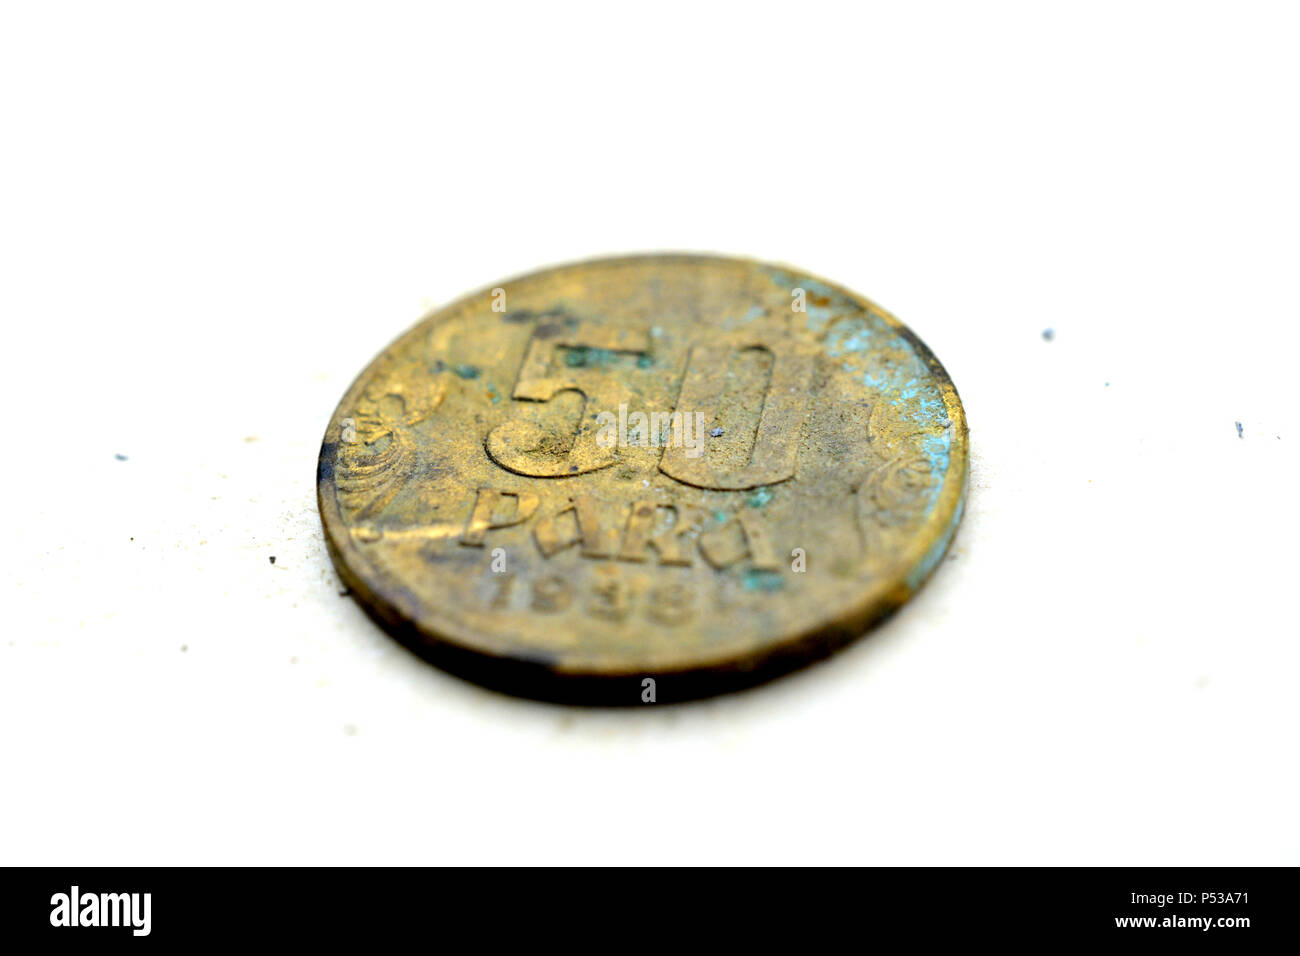 old dirty coin from yugoslavia, image of a Stock Photo